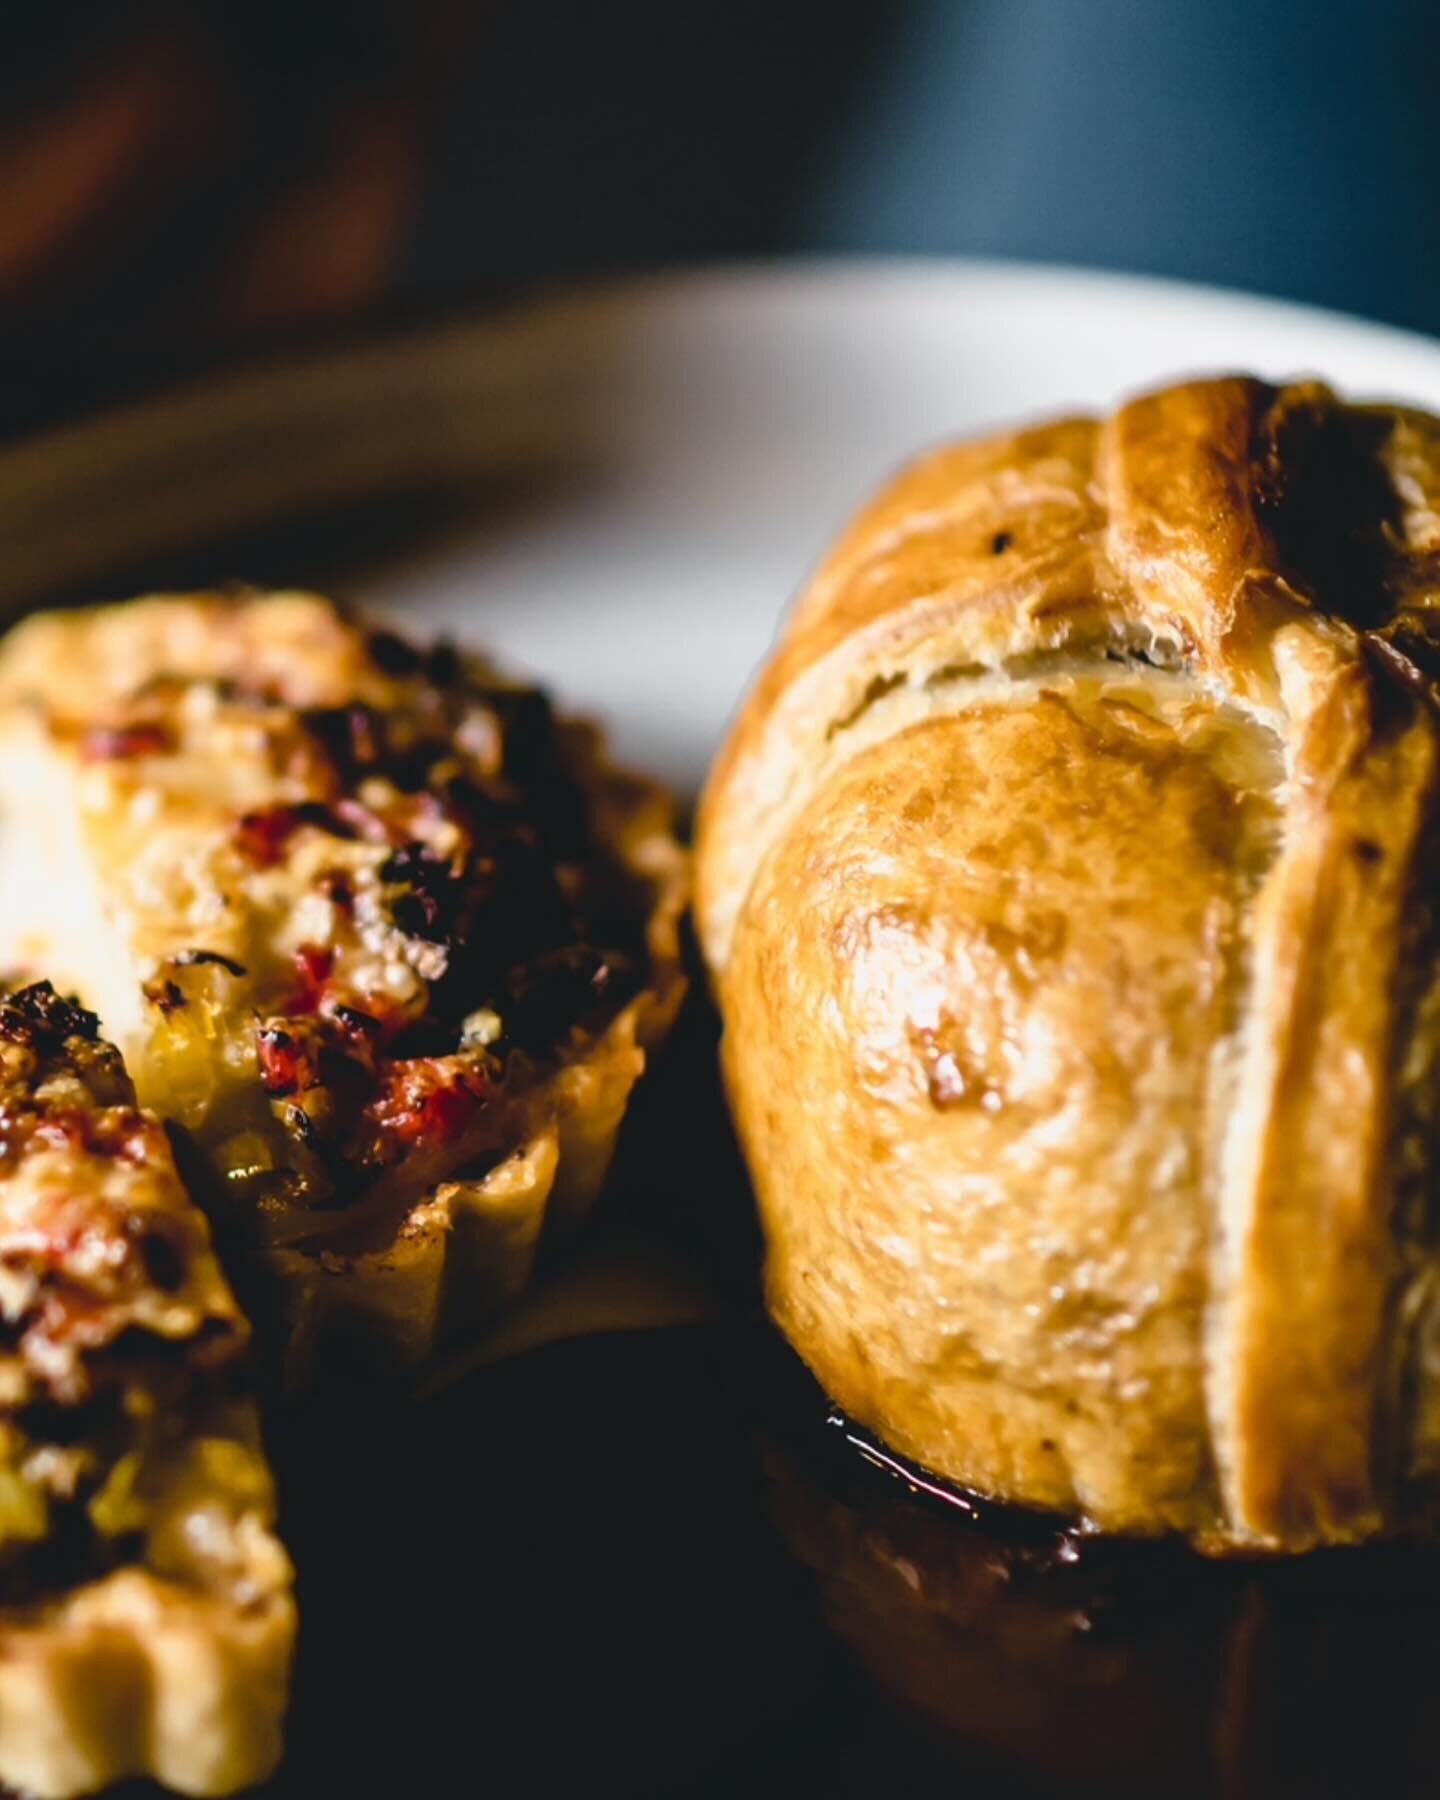 Just in time for the holiday push menu 74 is live and we brought our famous #beefwellington back wrapped in a magic duxelles of @seacoastmushrooms and laminated dough. Join us for your holiday experience!